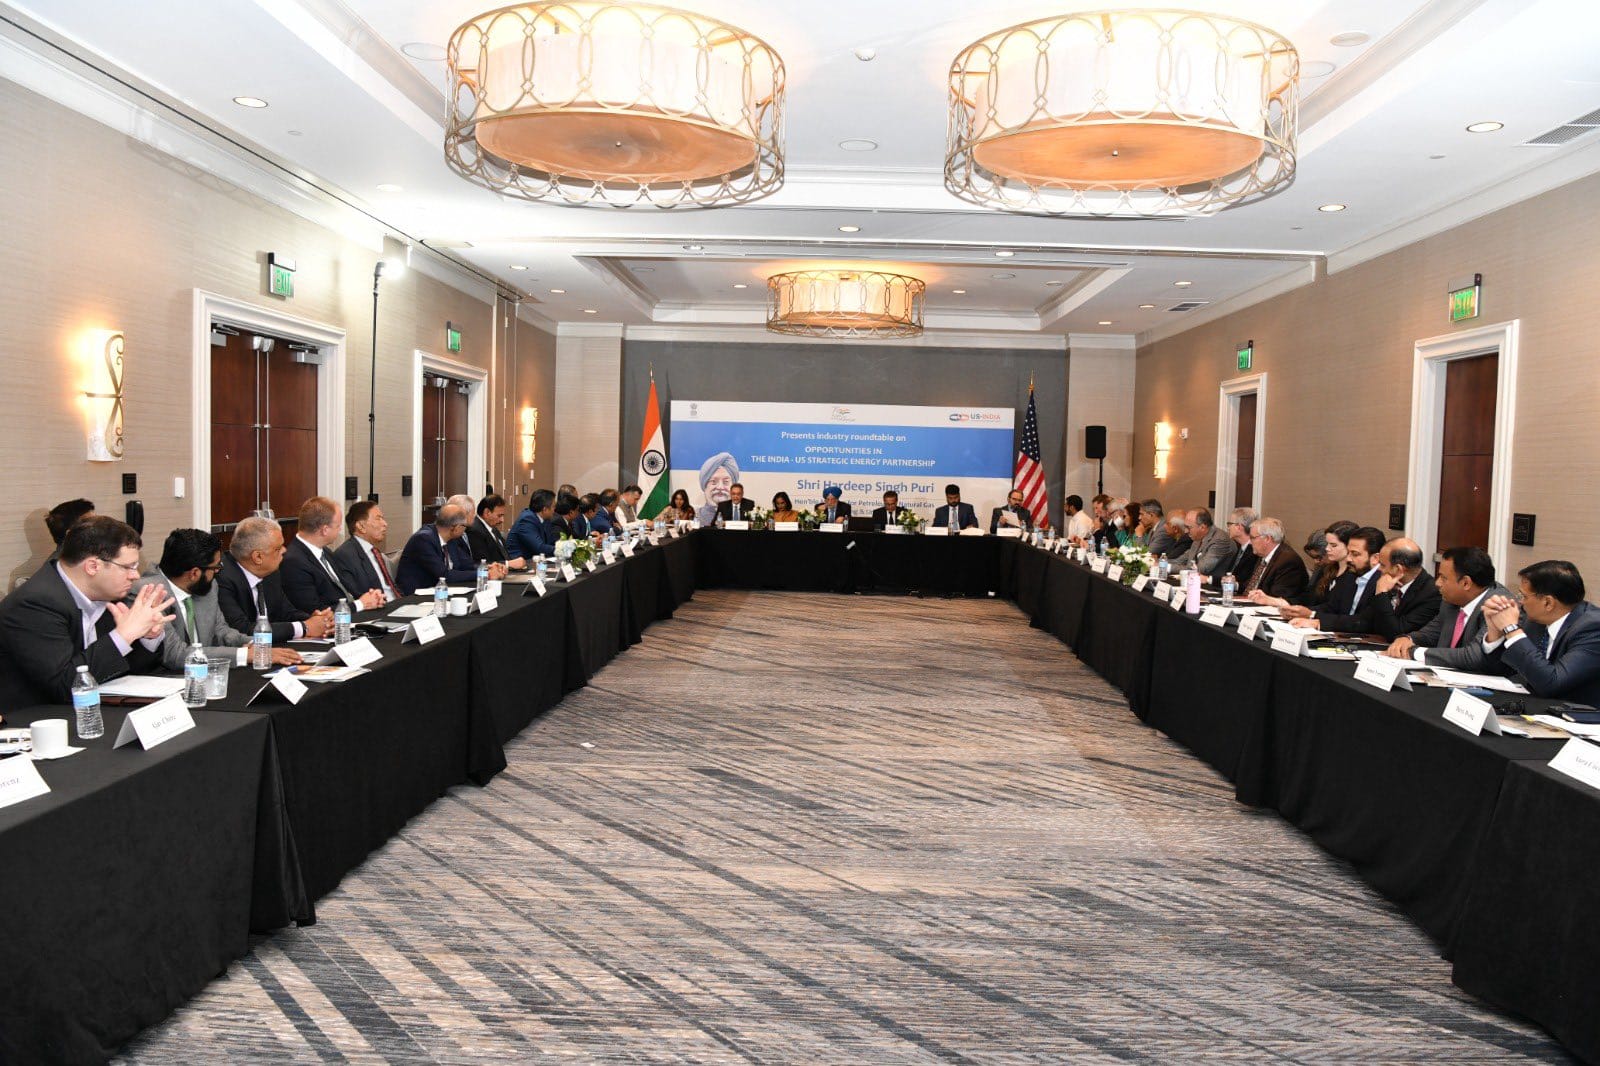 Roundtable with Minister Hardeep Singh Puri on ‘Opportunities in the India-US Strategic Energy Partnership’ organized in partnership with USISPF on 10 October 2022